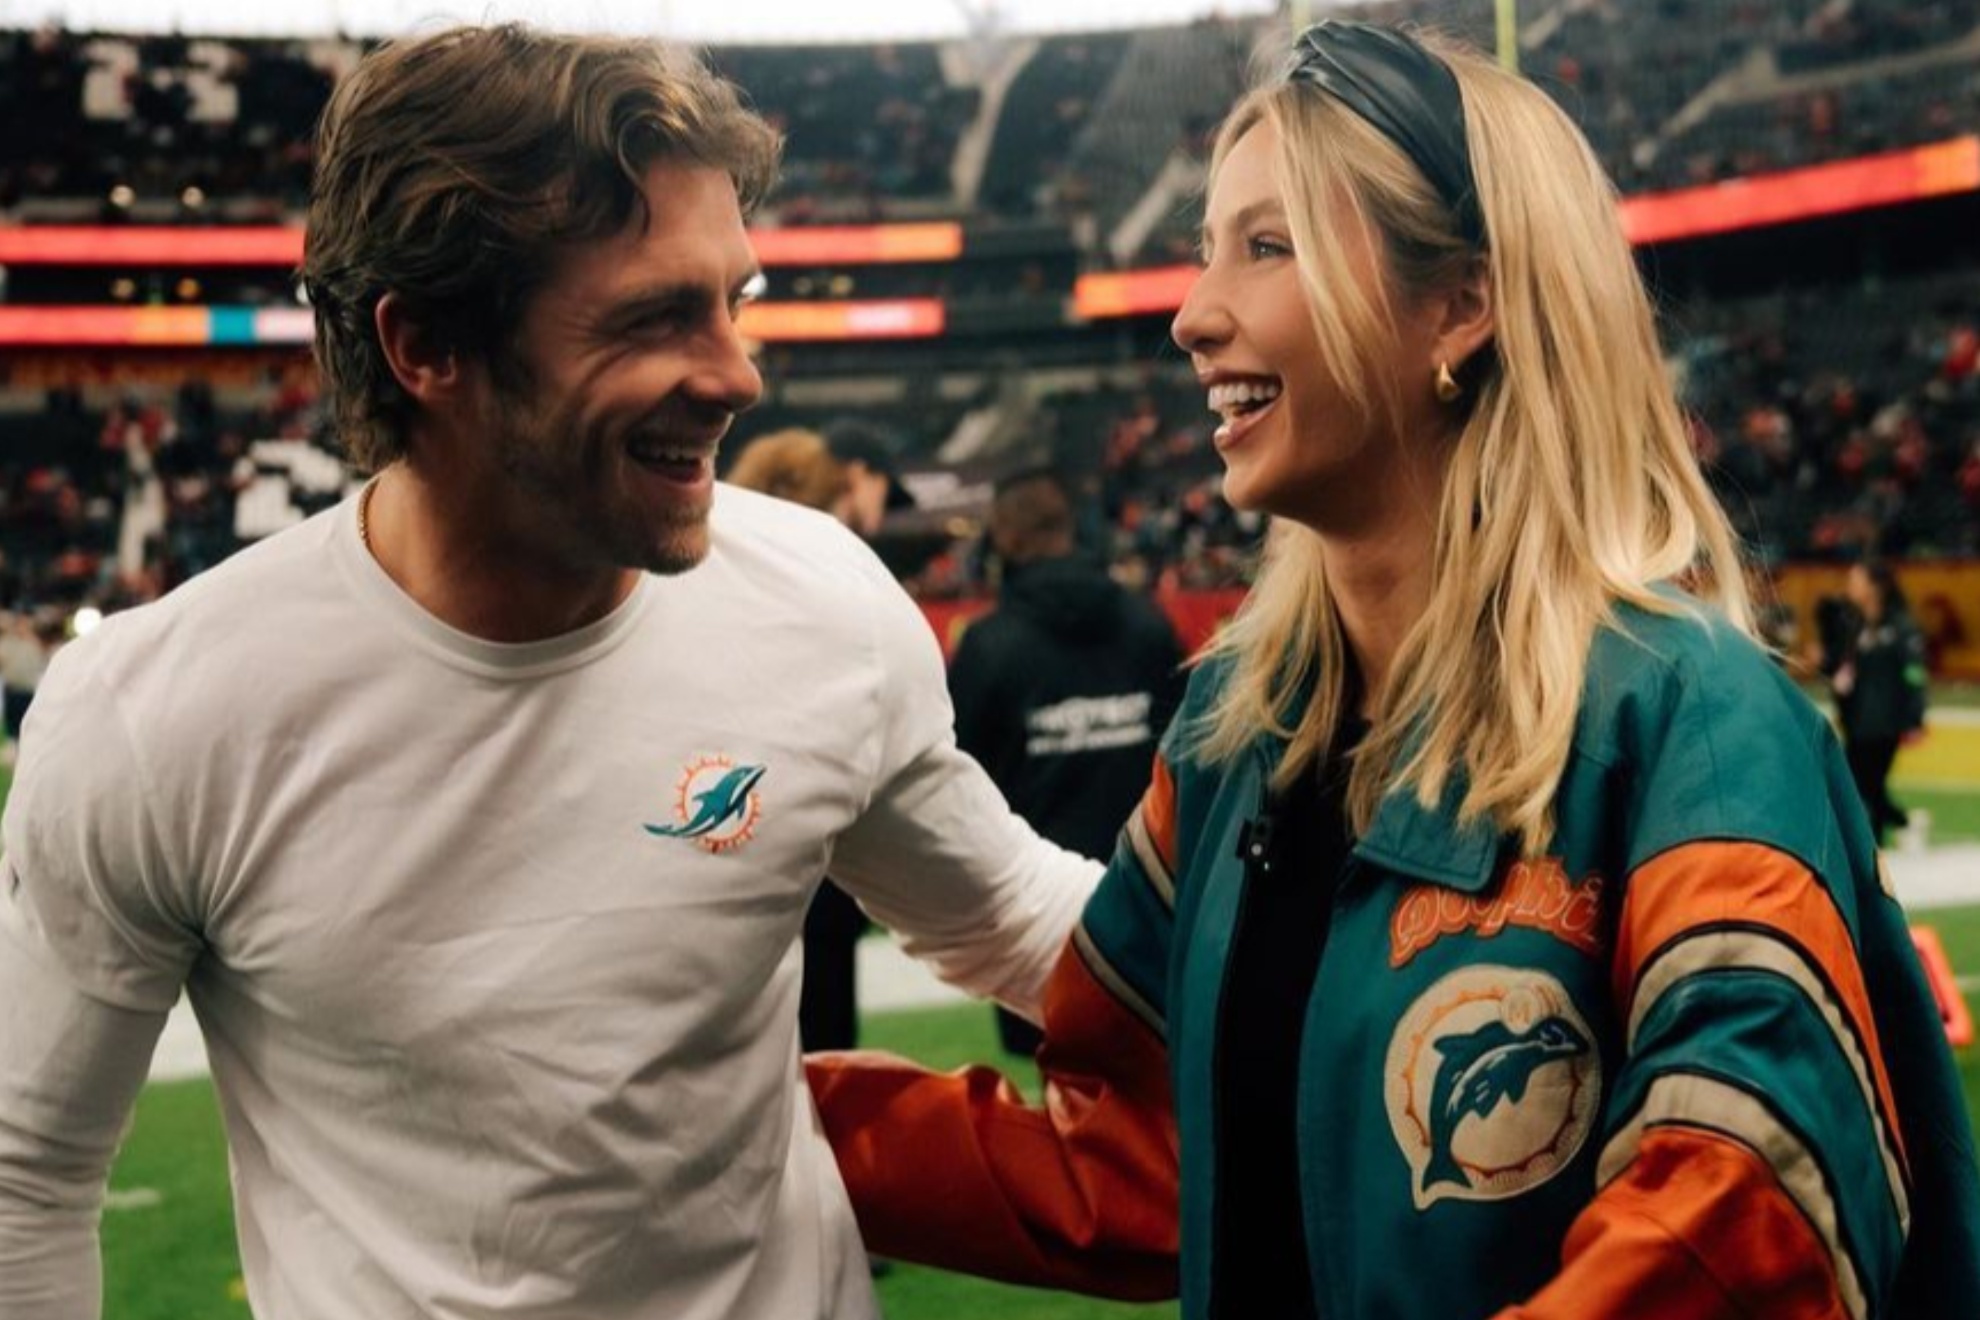 Alix Earle was at the Miami Dolphins game in Frankfurt, Germany with boyfriend Braxton Berrios